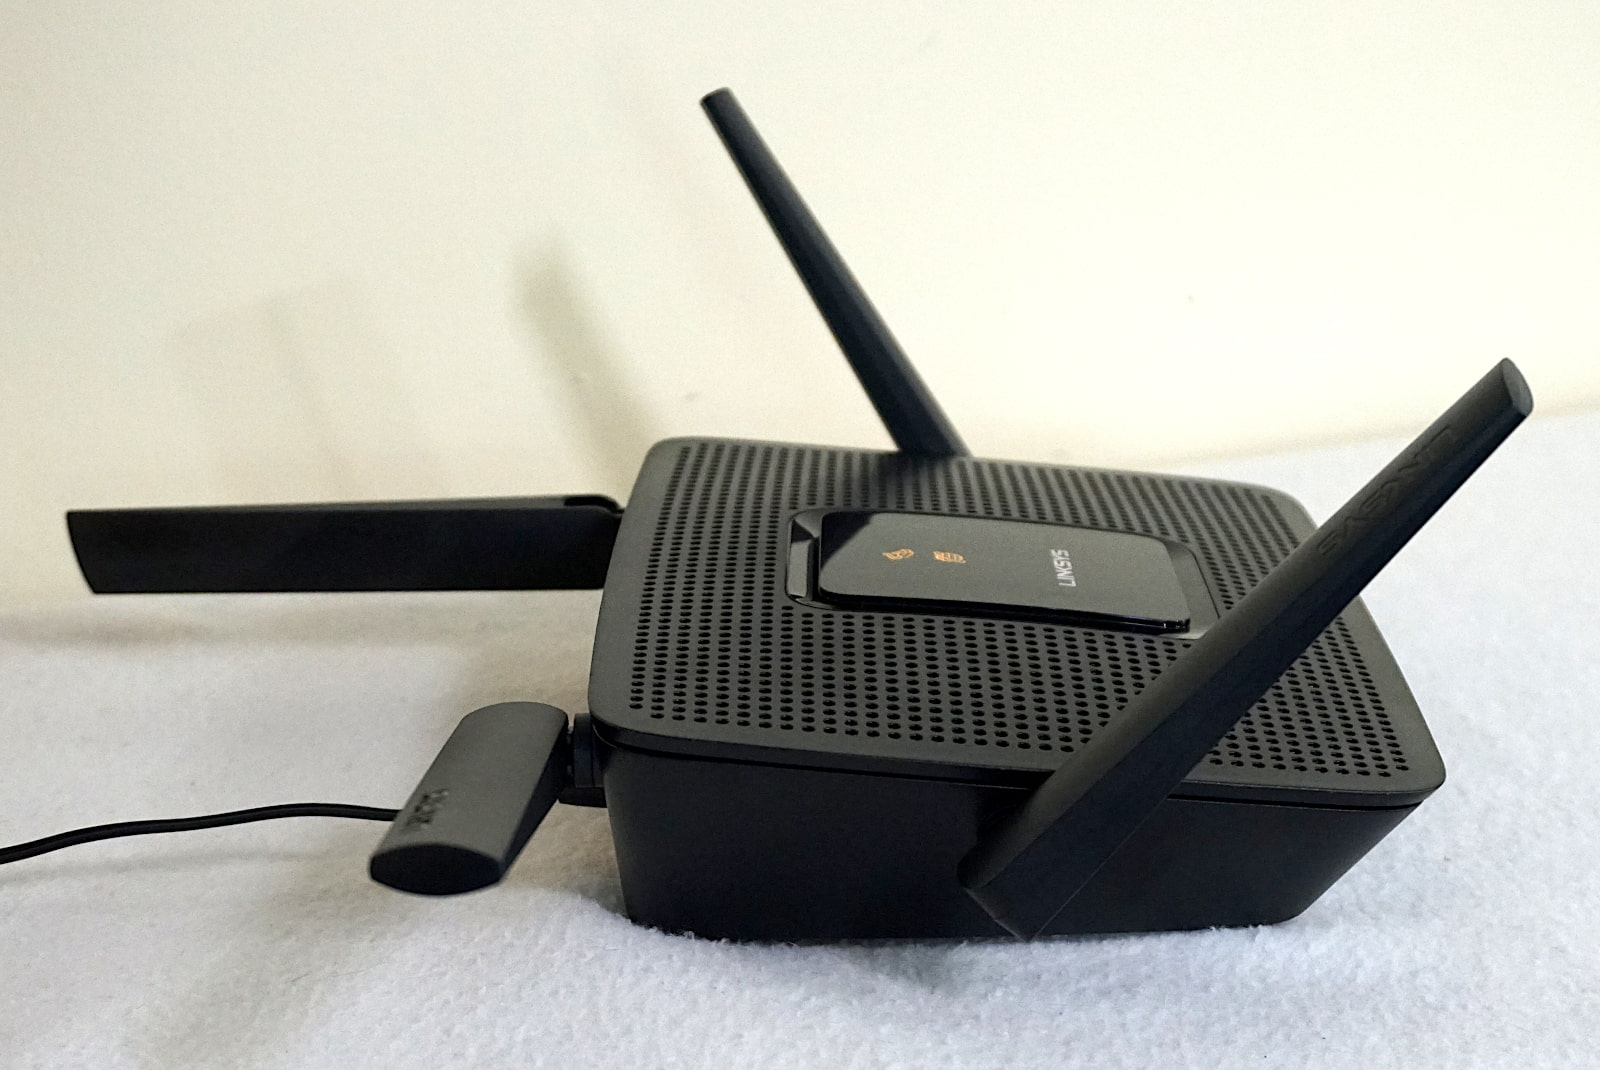 Side view of Linksys EA8300 with antennas pointed in different directions